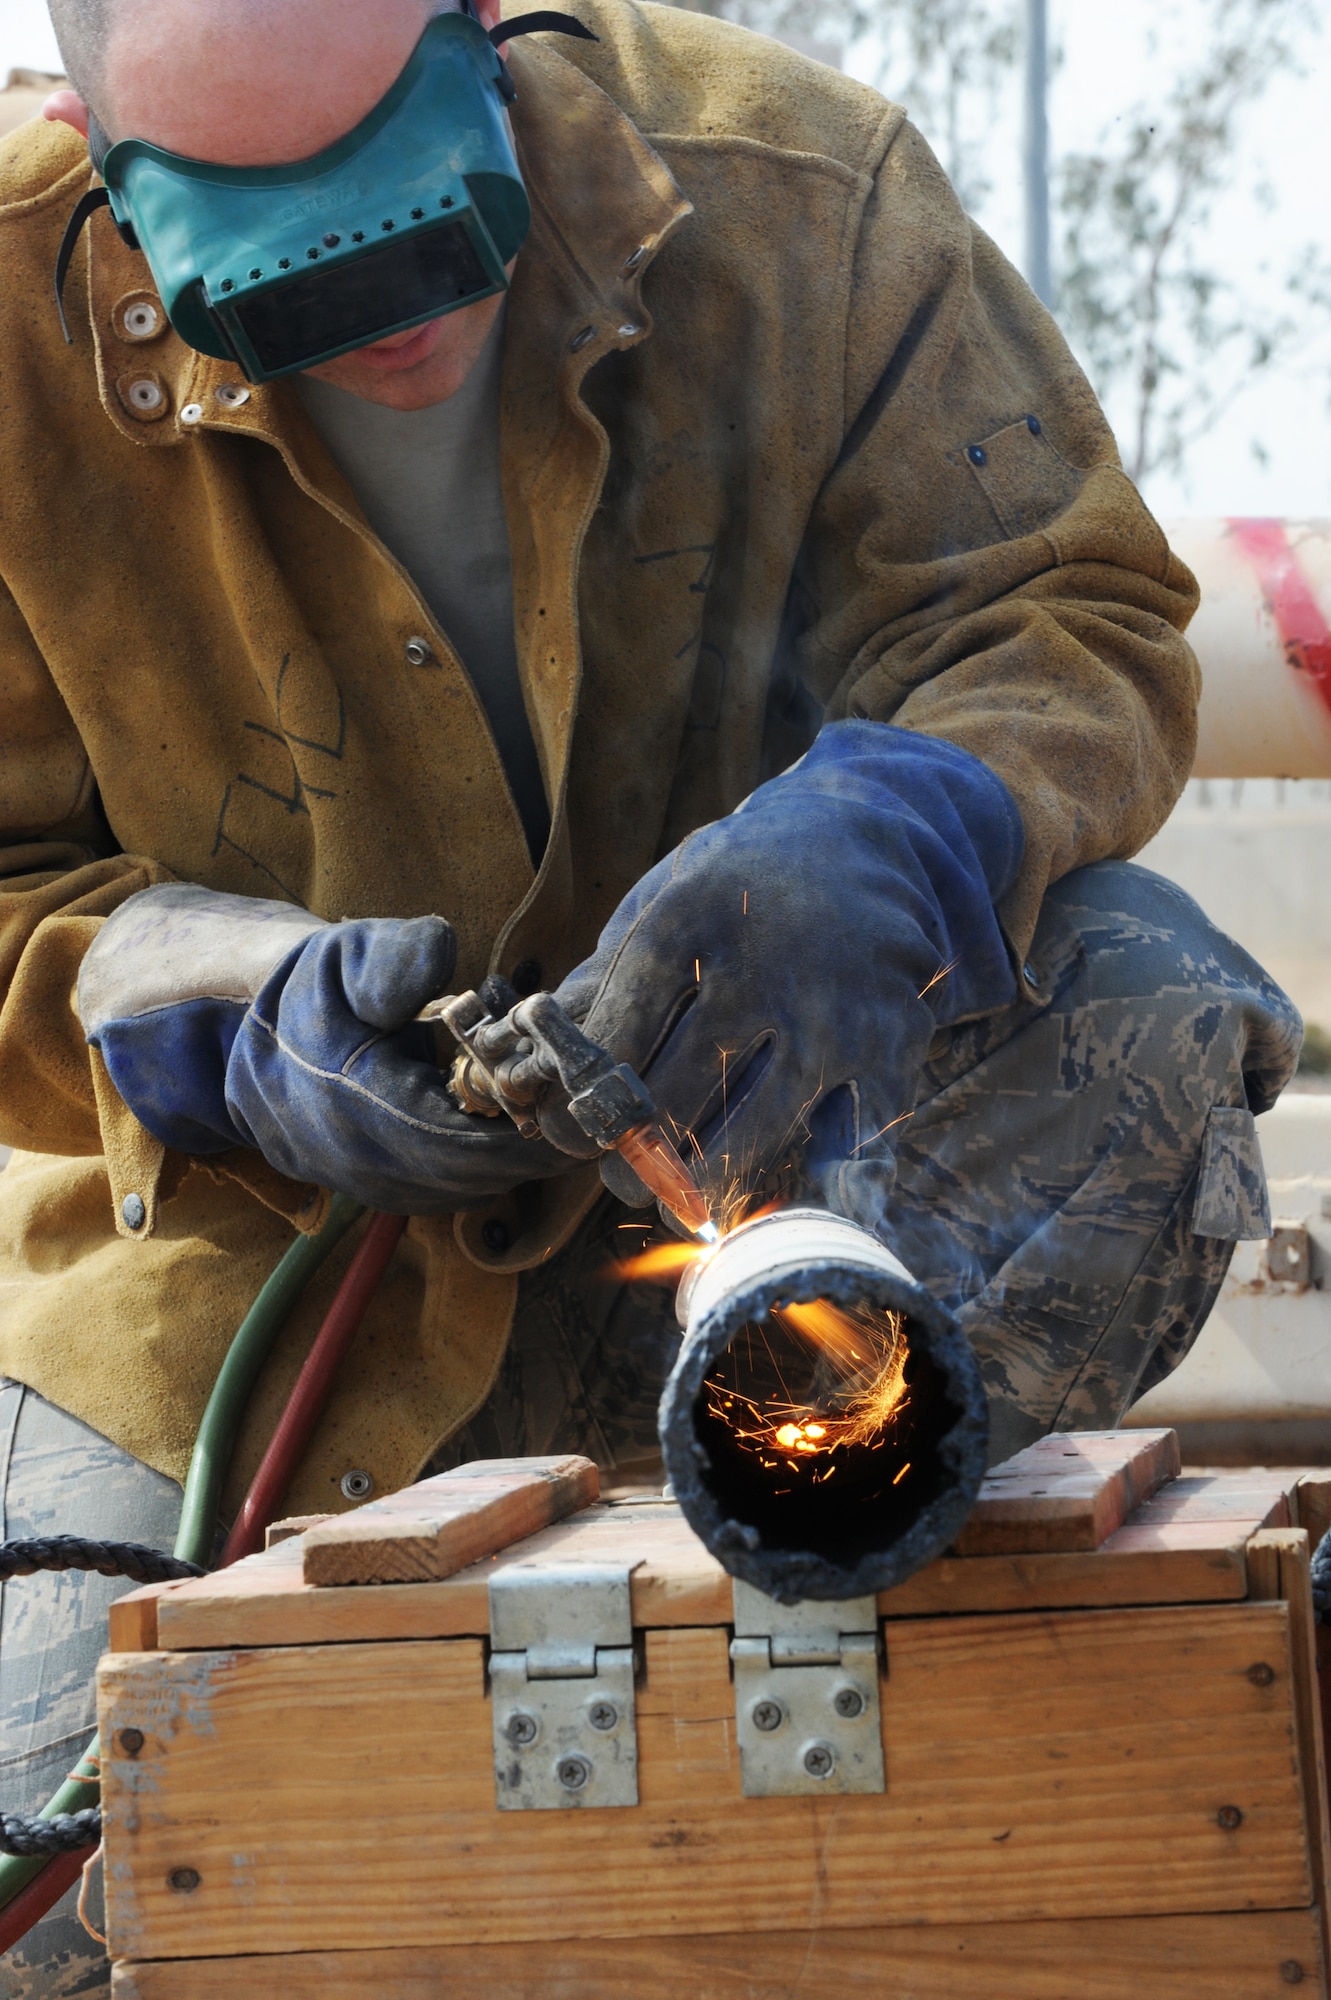 Tech. Sgt. Roy Hurd uses an oxy-acetylene torch to cut up enemy weapons at Joint Base Balad, Iraq, March 18. The weapons, which were turned in by units and are being destroyed so they cannot be used against coalition forces or Iraqis. Sergeant Hurd is a 332nd Expeditionary Civil Engineer Squadron structural journeyman. (U.S. Air Force photo/Senior Airman Elizabeth Rissmiller)